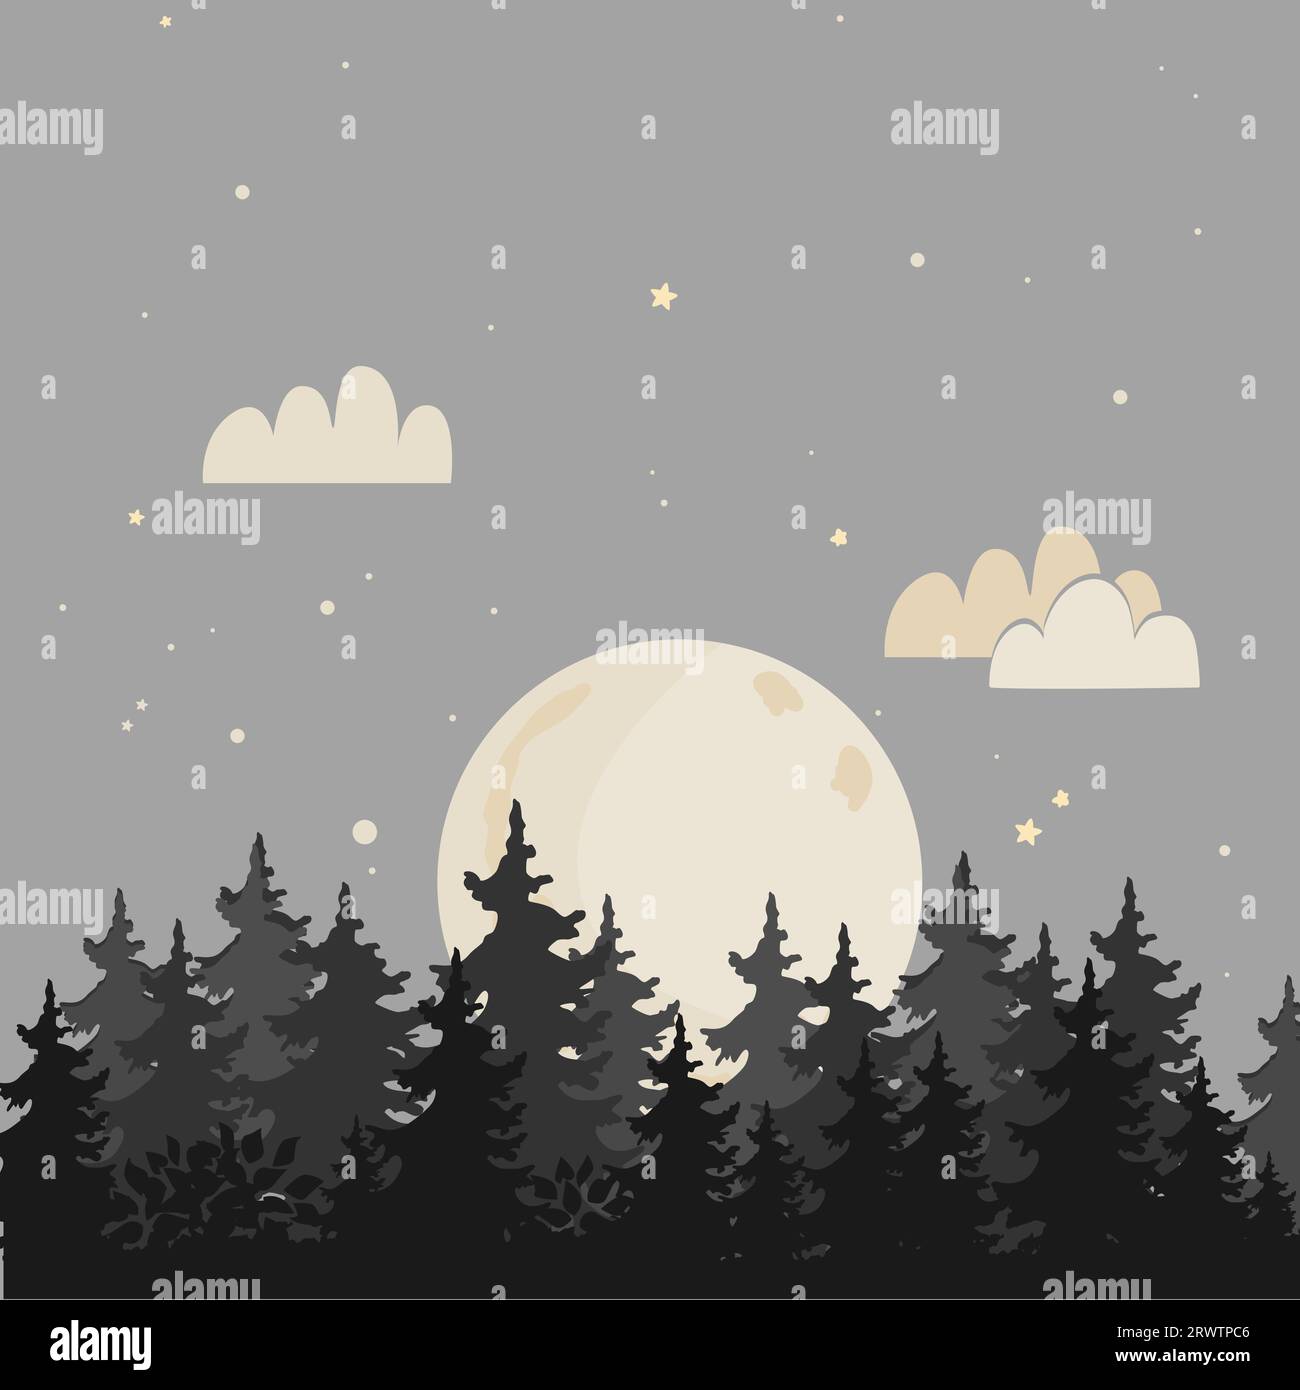 Vector night background with trees, moon, clouds and shining stars on the sky. Forest landscape illustration. Stock Vector